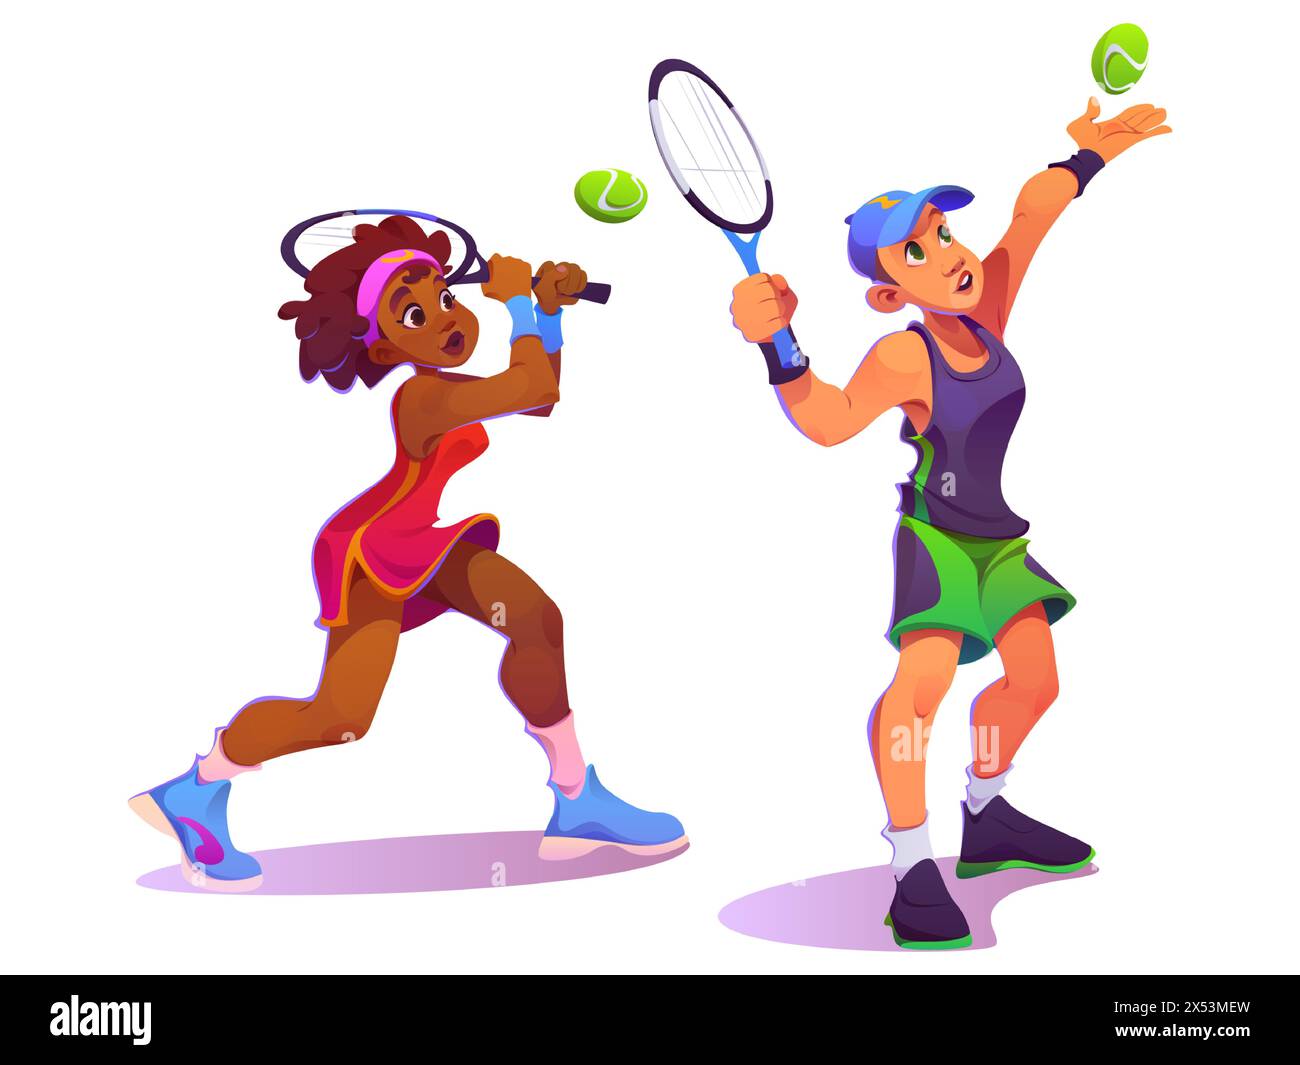 Tennis players set isolated on white background. Vector cartoon illustration of african young woman running with racket in hand, active man serving ball, sports competition athletes, healthy lifestyle Stock Vector